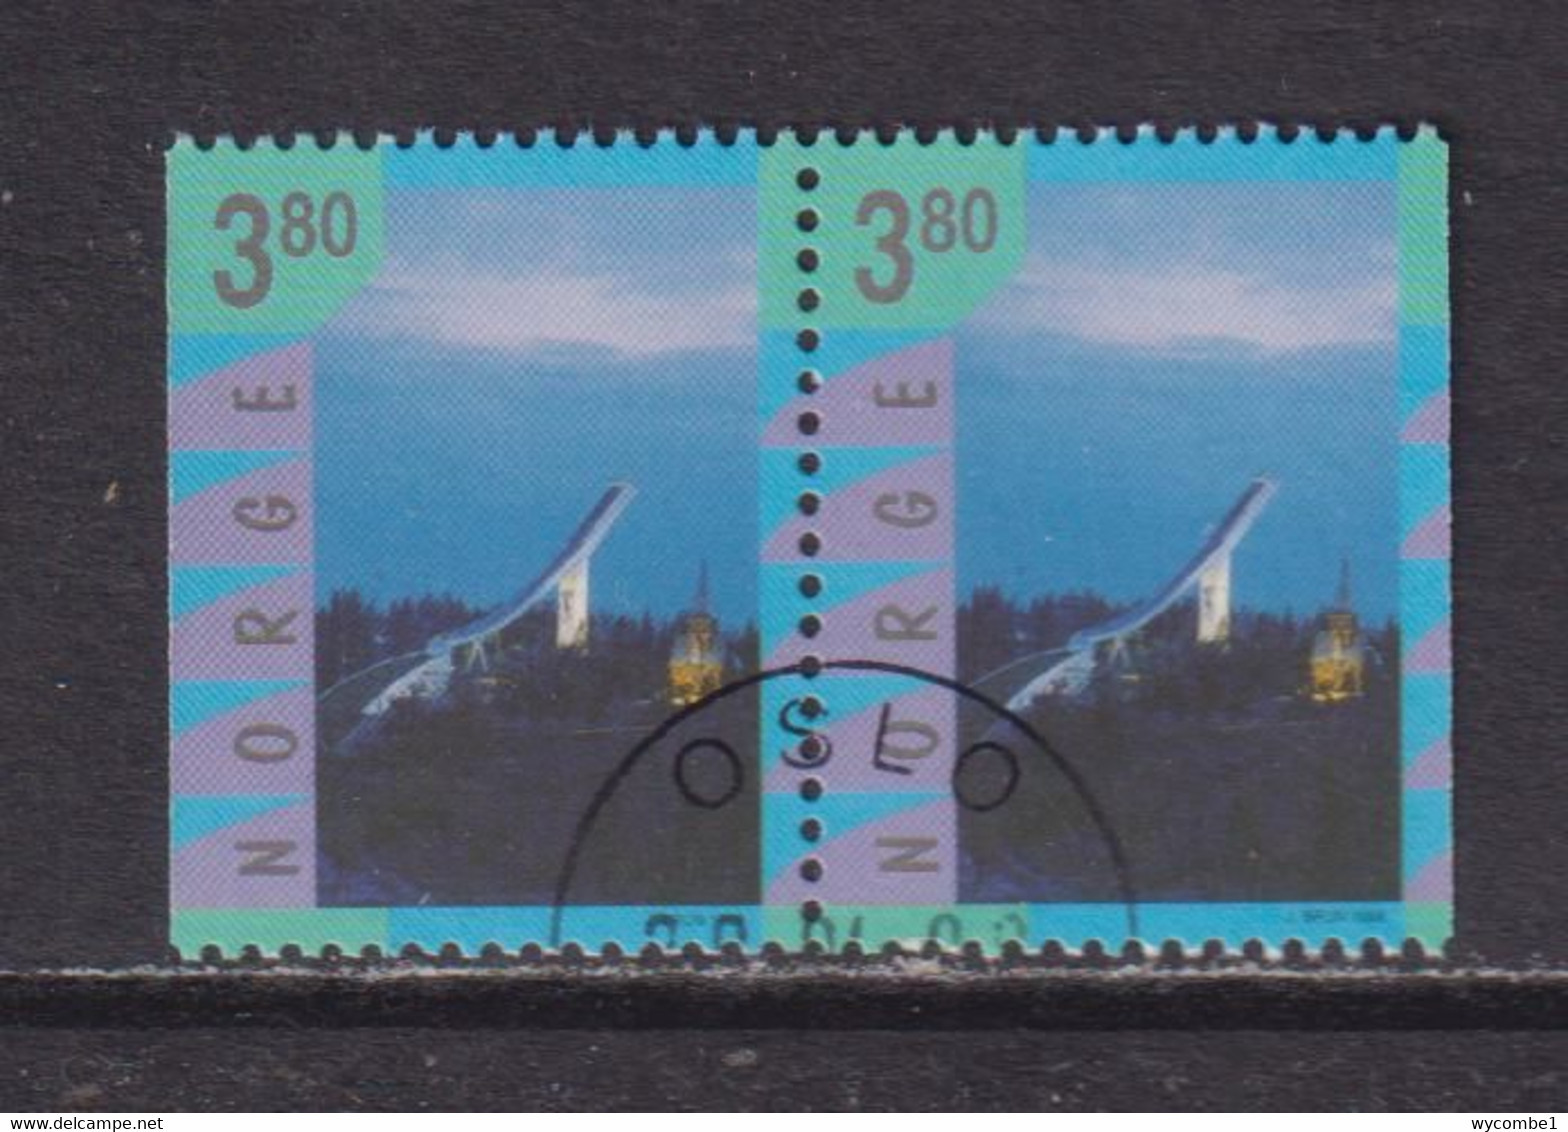 NORWAY - 1998 Tourism 3k80  Booklet Pair  Used As Scan - Used Stamps